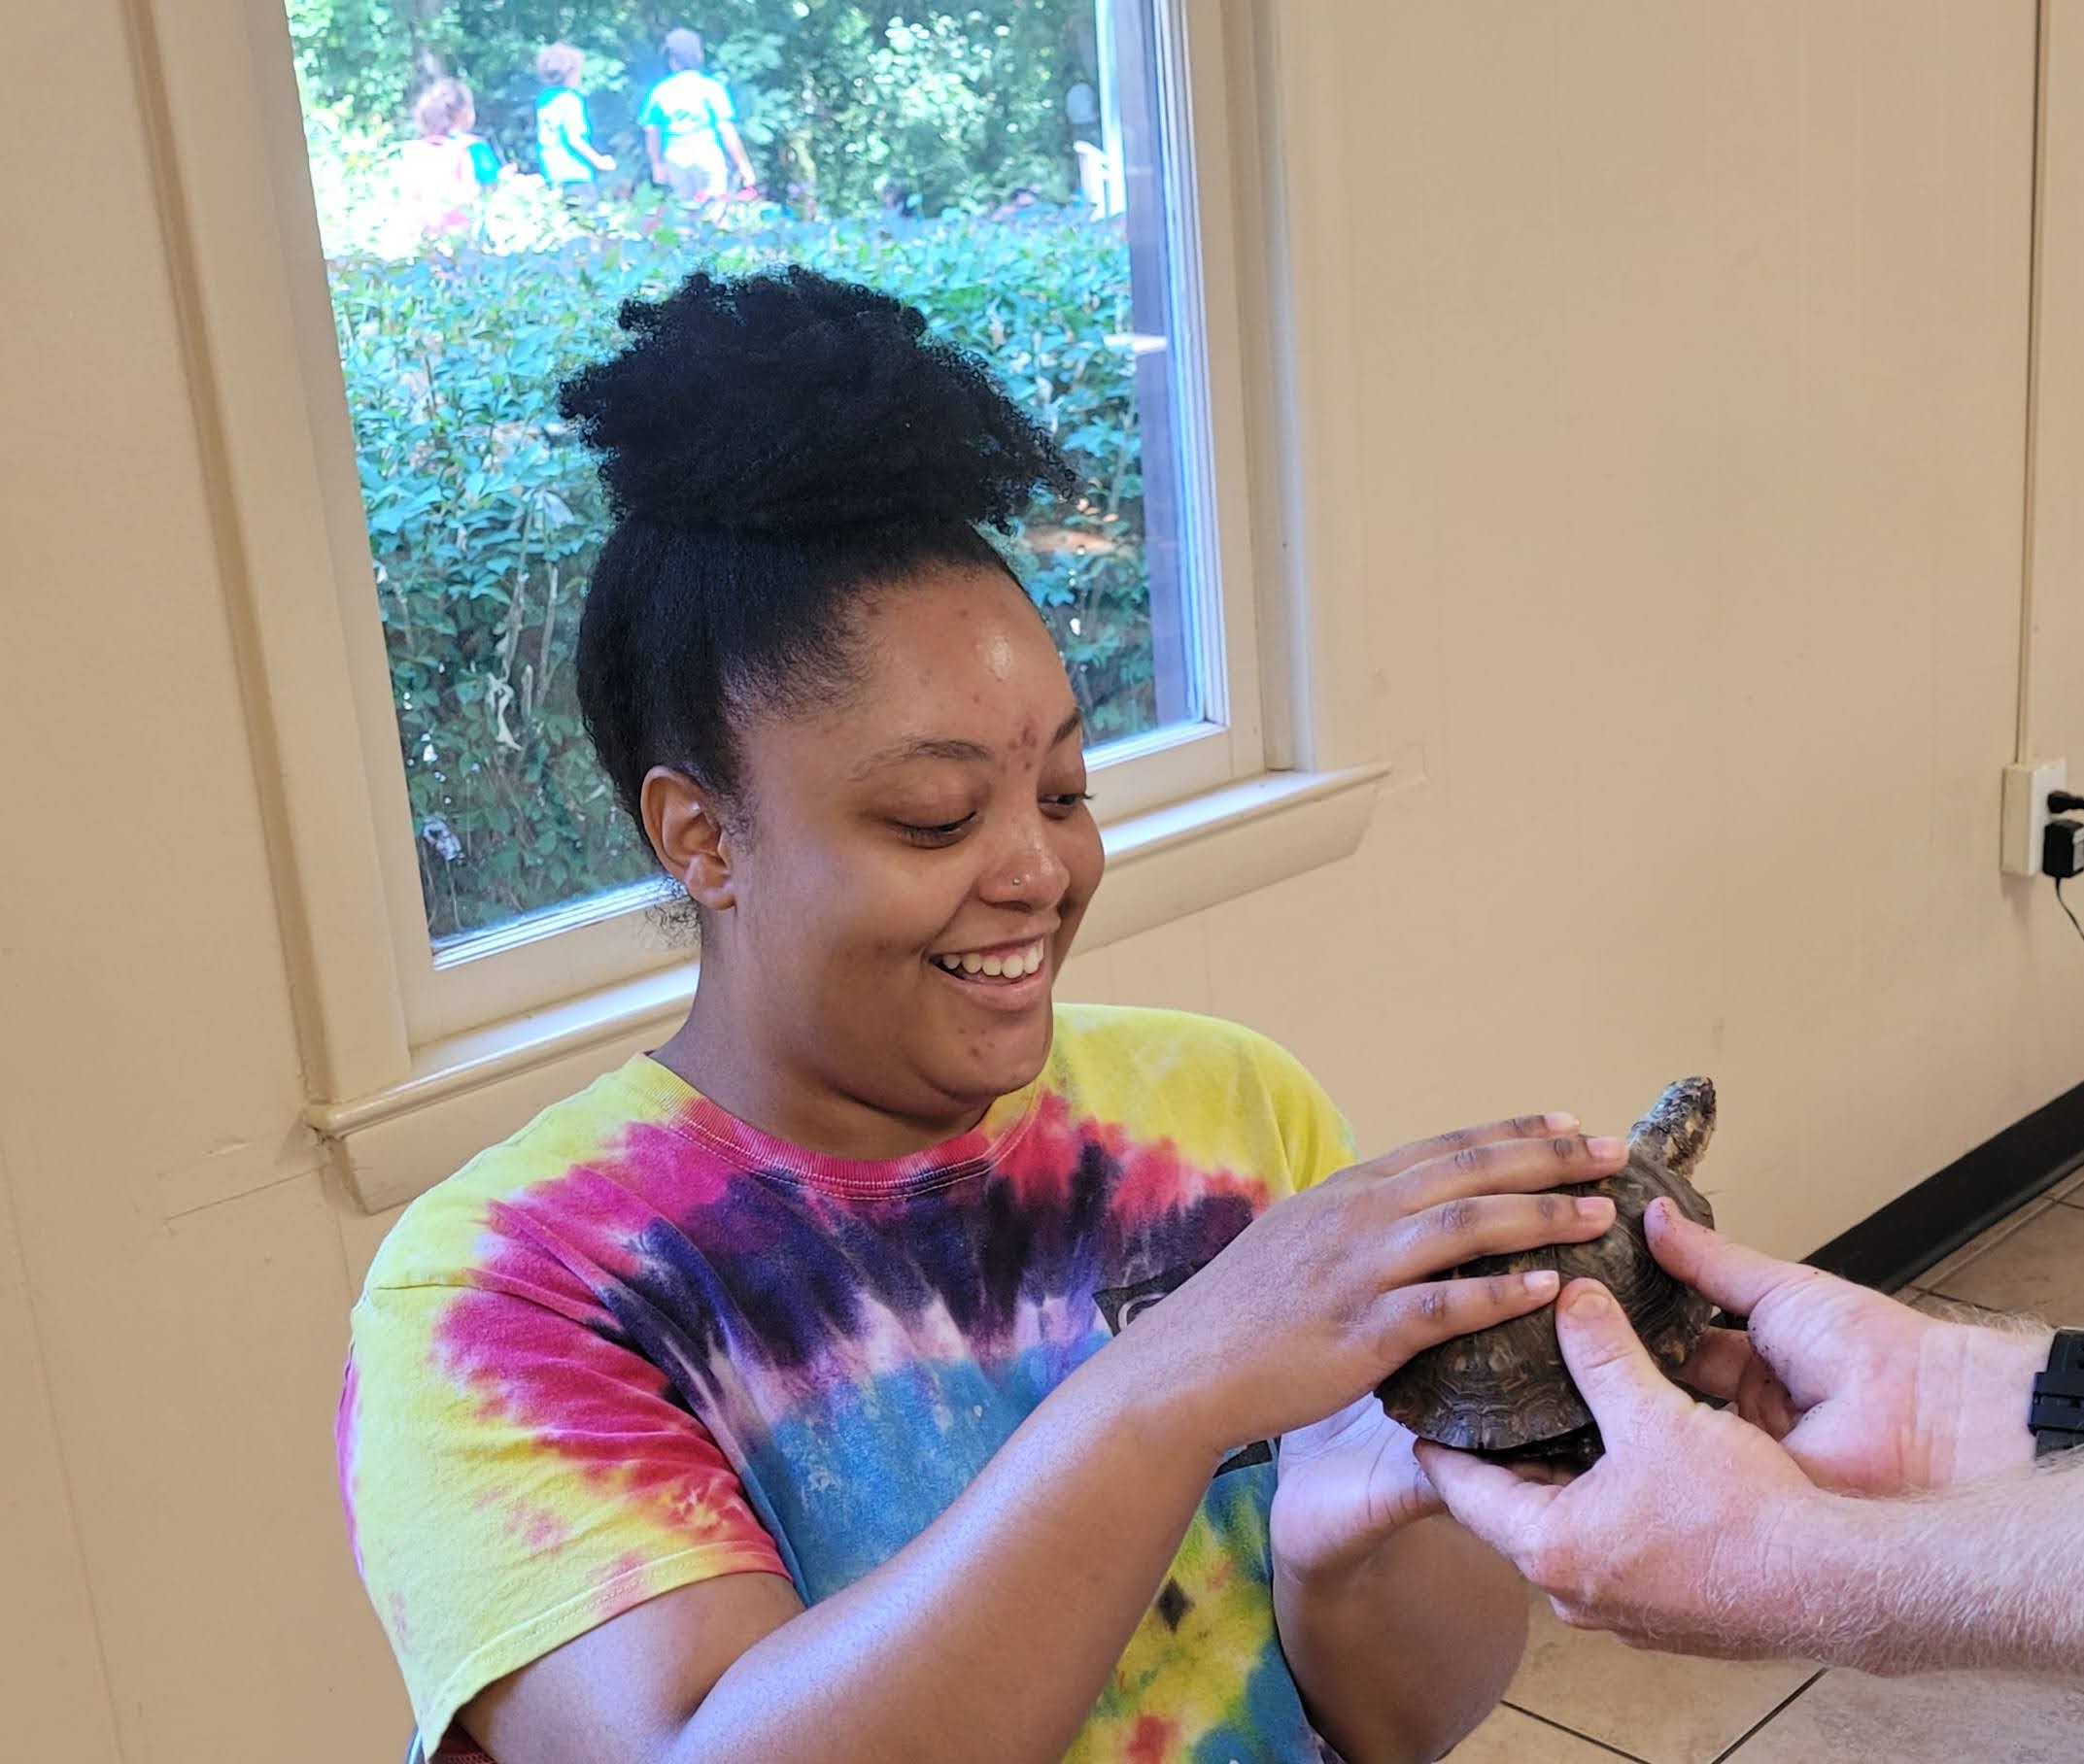 A young woman is touching a turtle that is being held out to her.